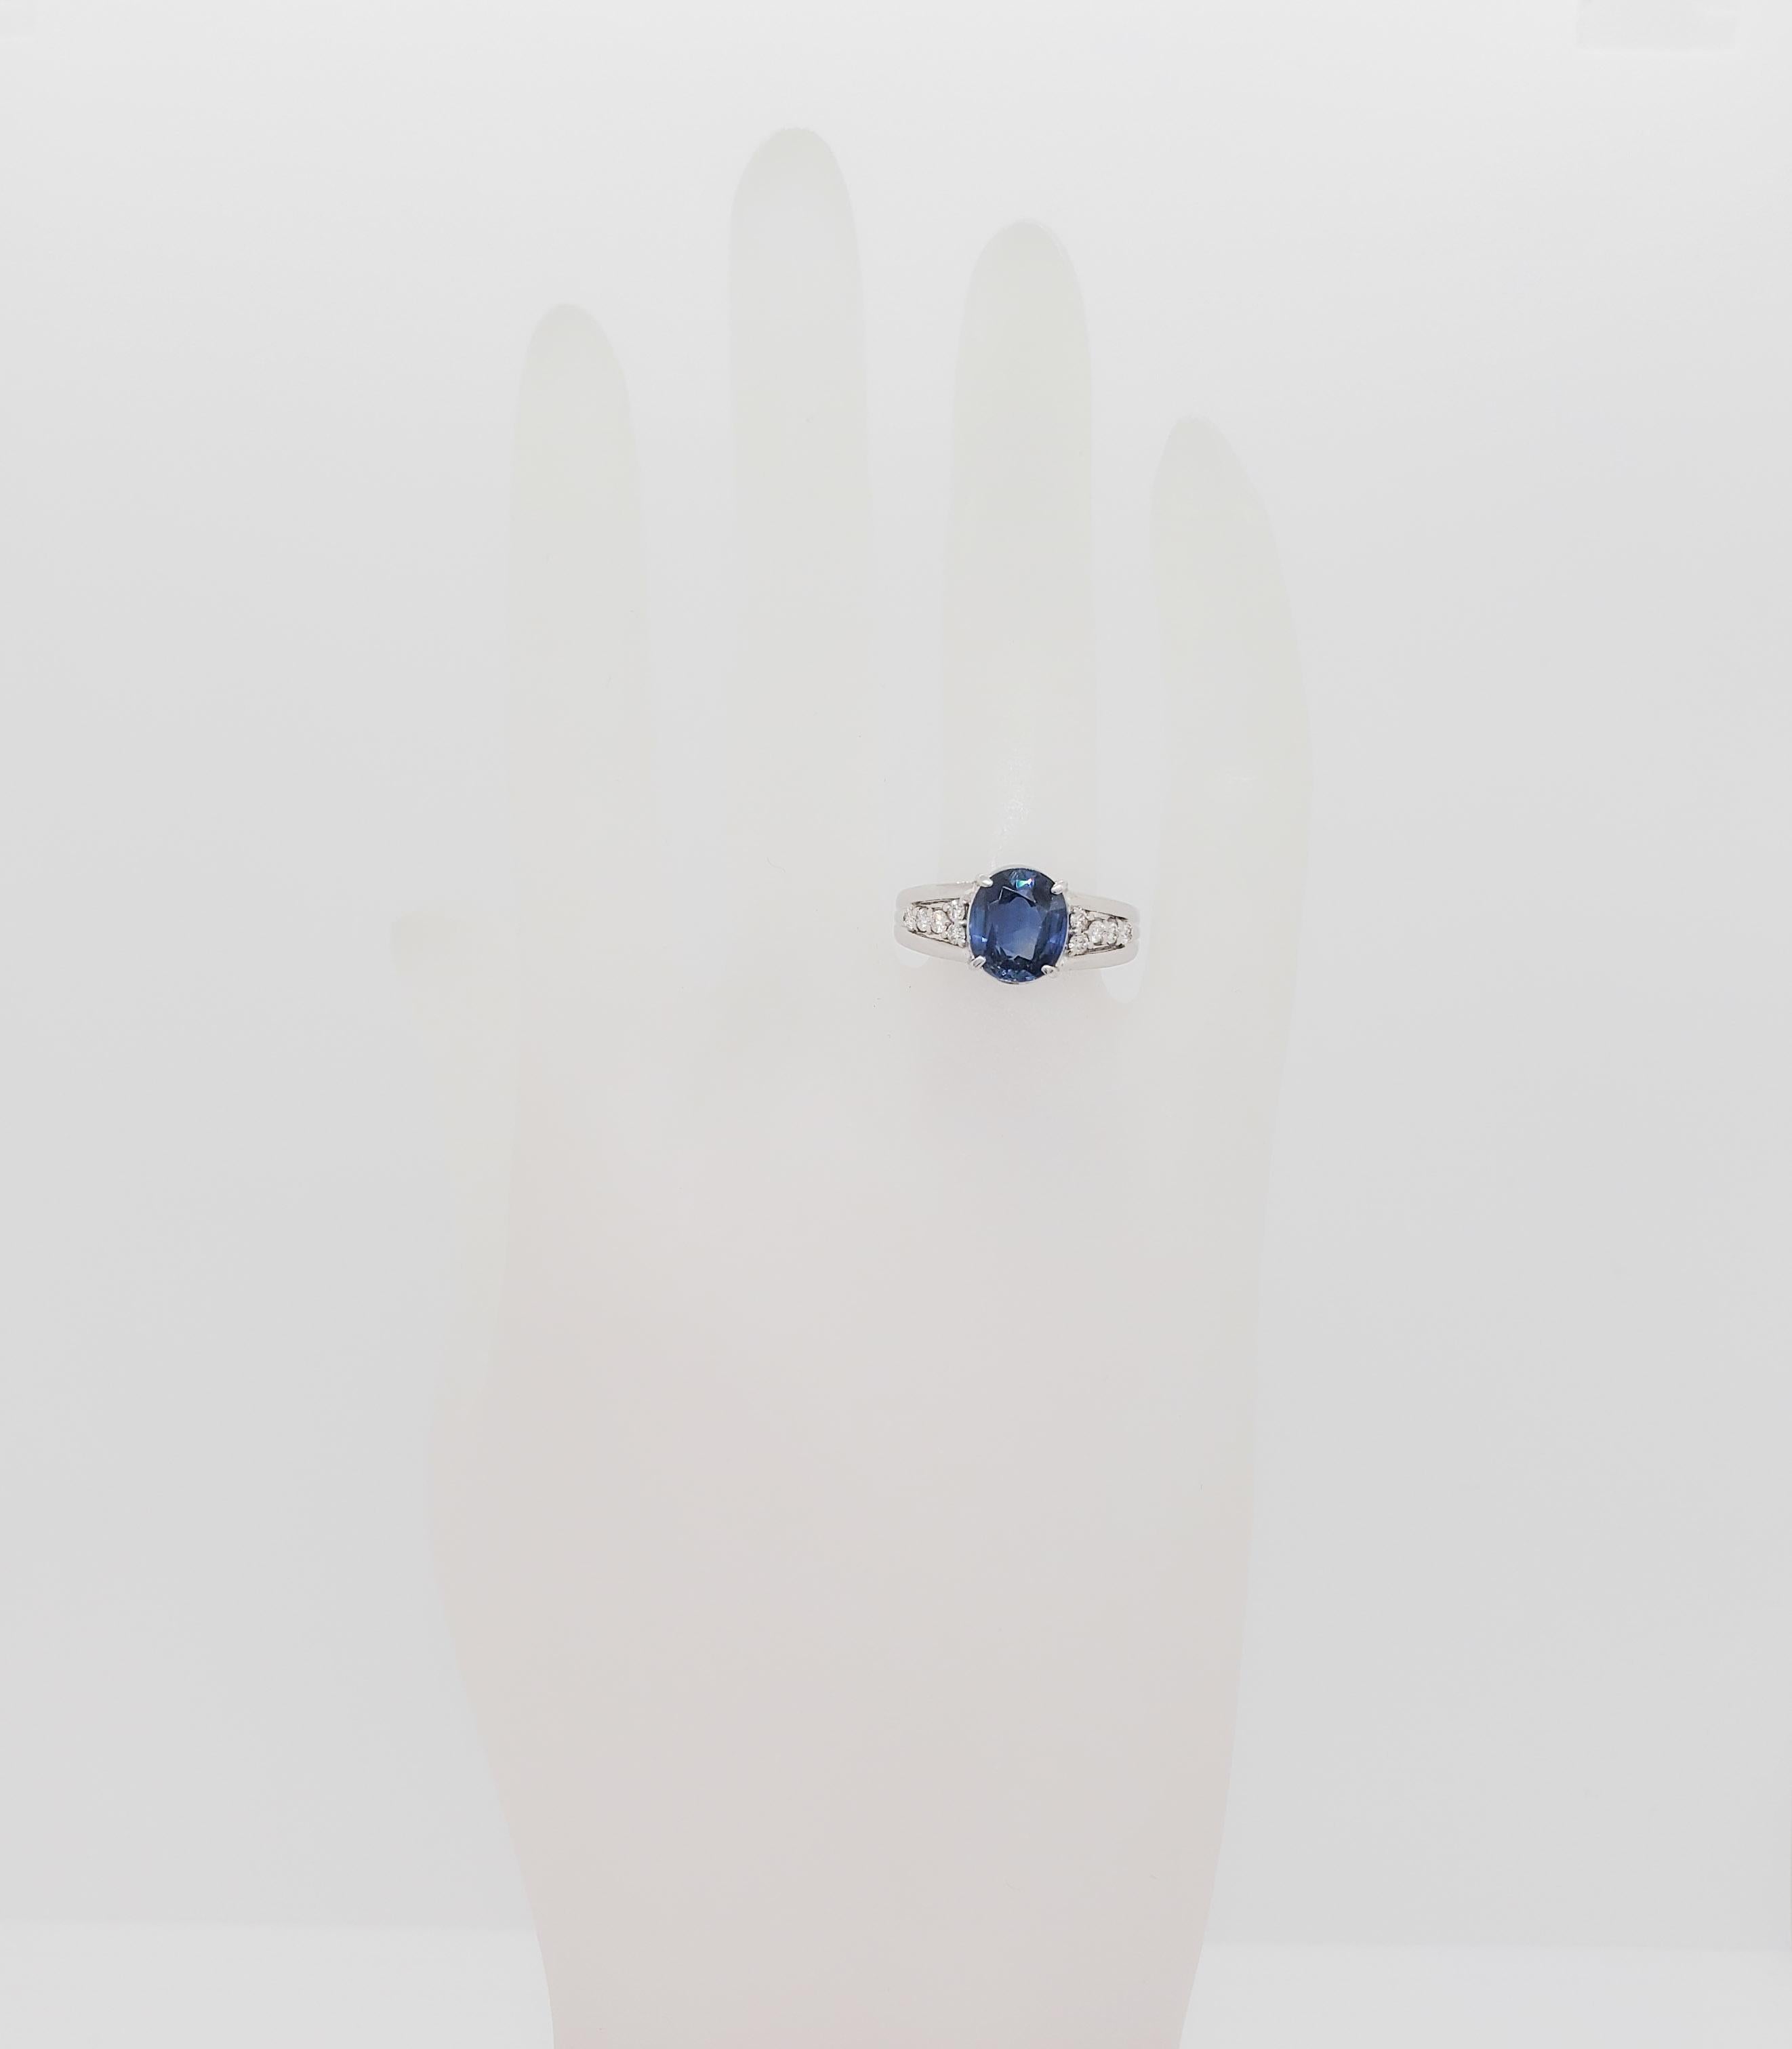 Oval Cut Blue Sapphire Oval and White Diamond Ring in 18k White Gold